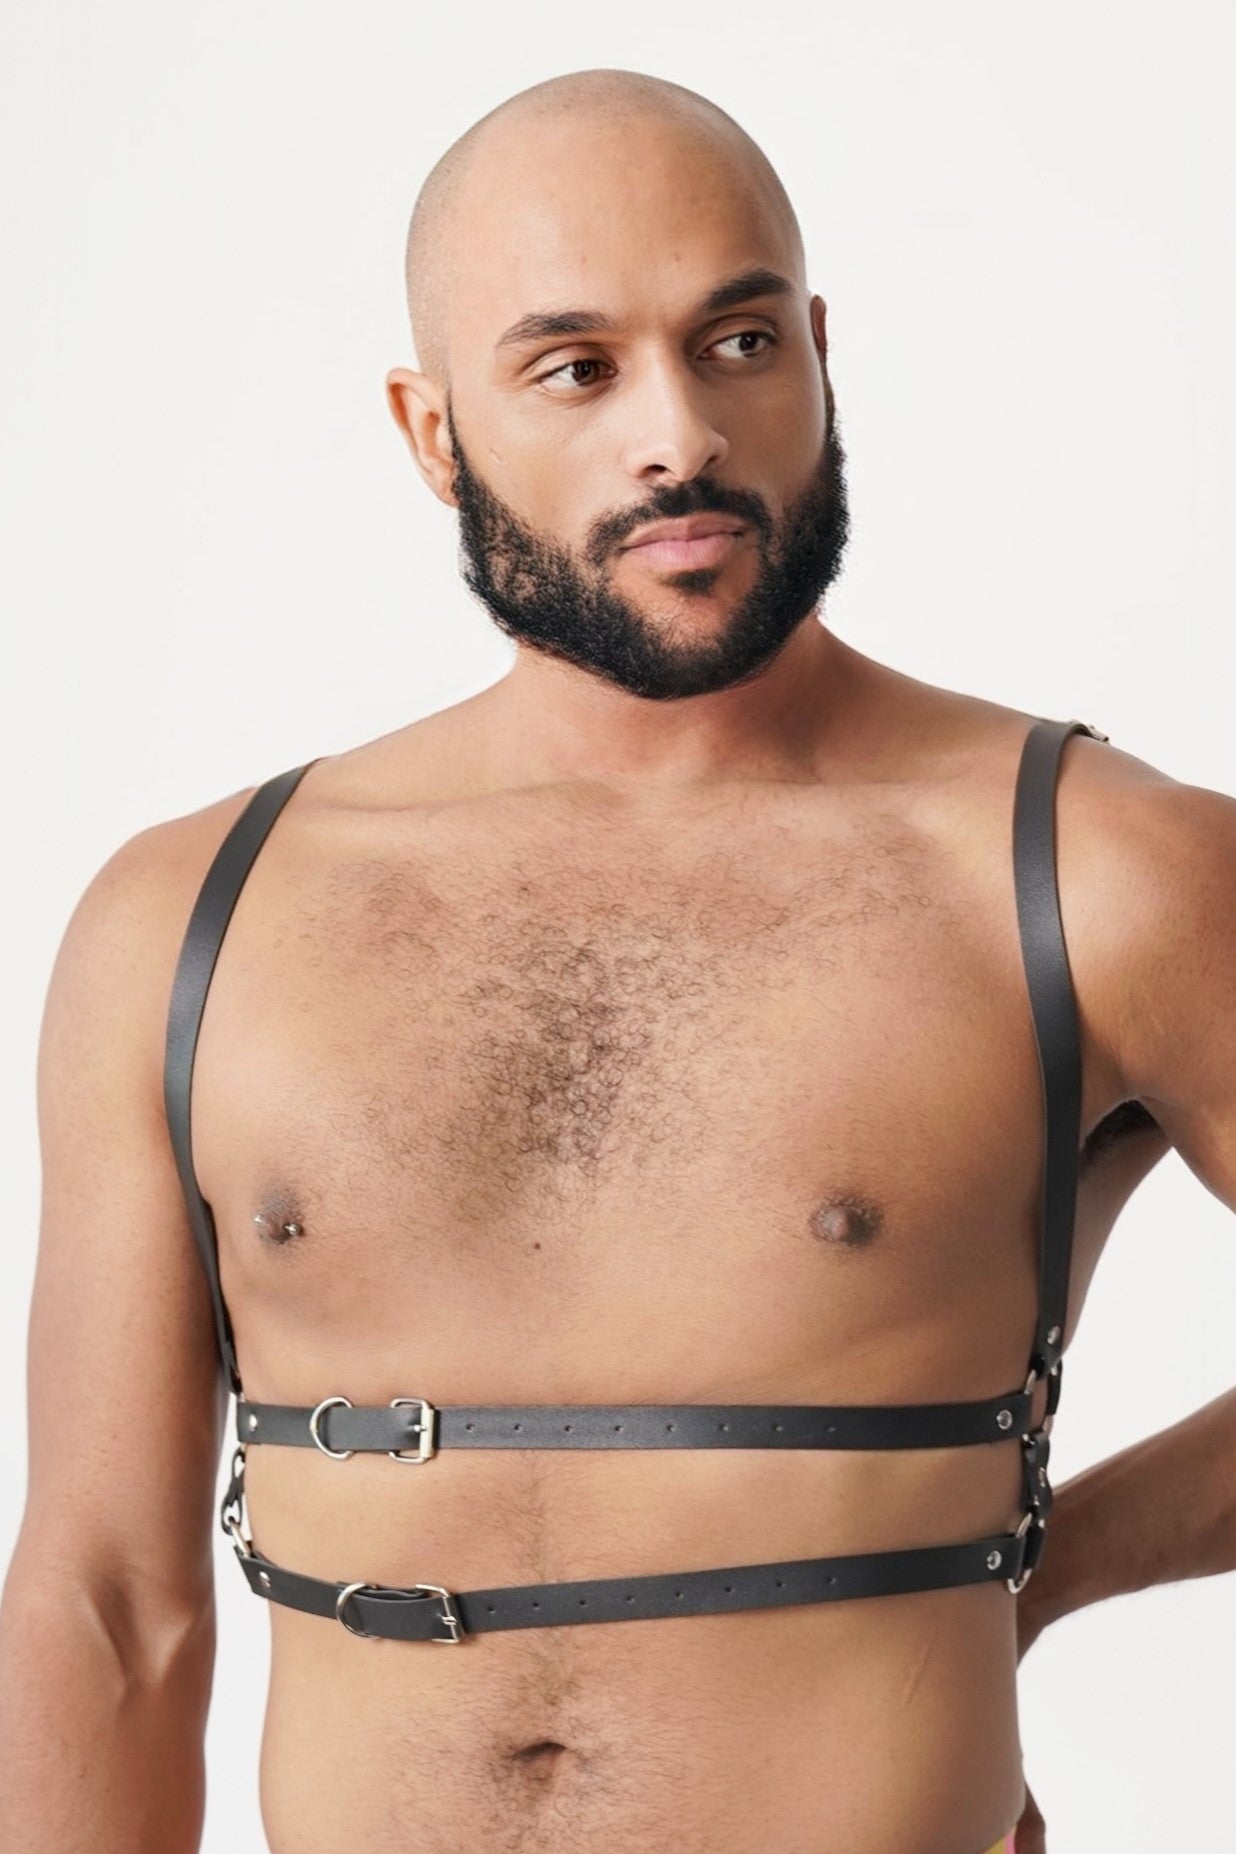 Black Sexy Fetish Male Leather Harness, Harness, bdsm harness, fetish harness